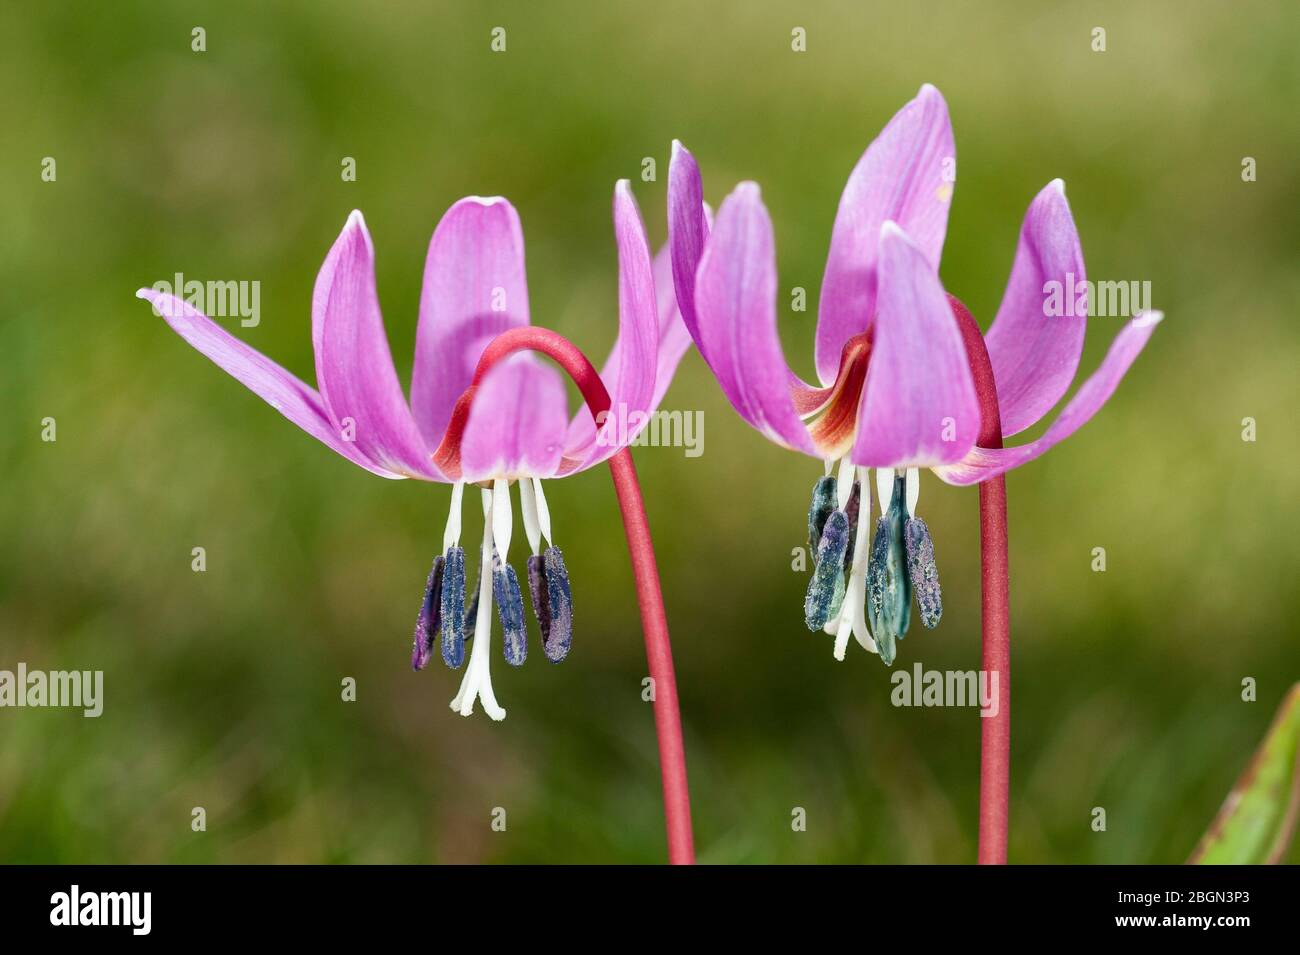 A selective photo of a beautiful alpine flower, Erythronium dens-canis, on an unfocused green background. León, Spain Stock Photo